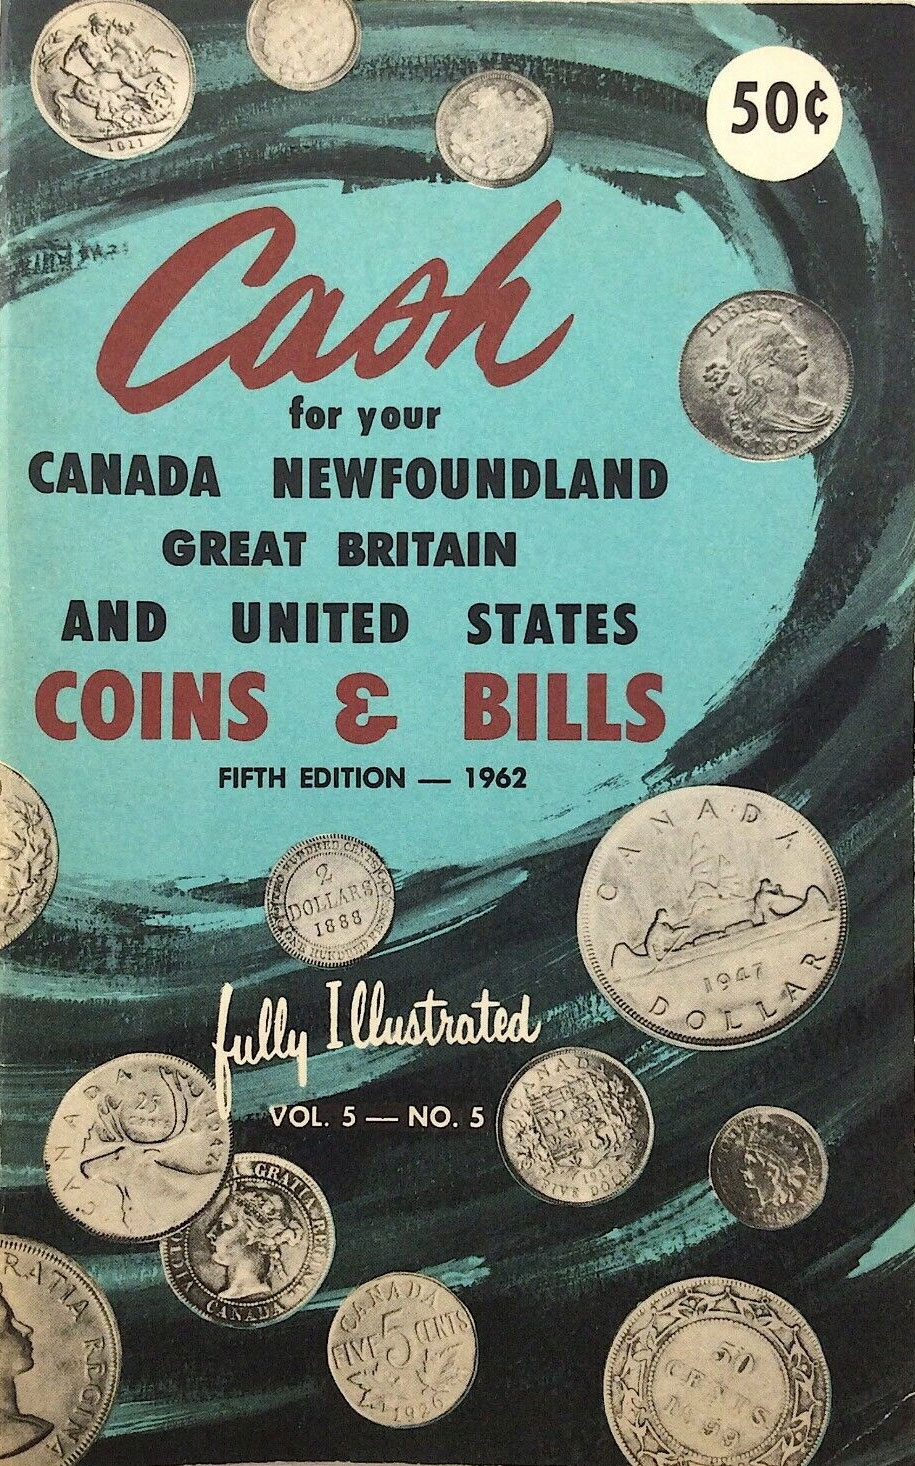 Cash for your Canada Newfoundland Great Britain and United States Coins & Bills Vol. 5 No. 5